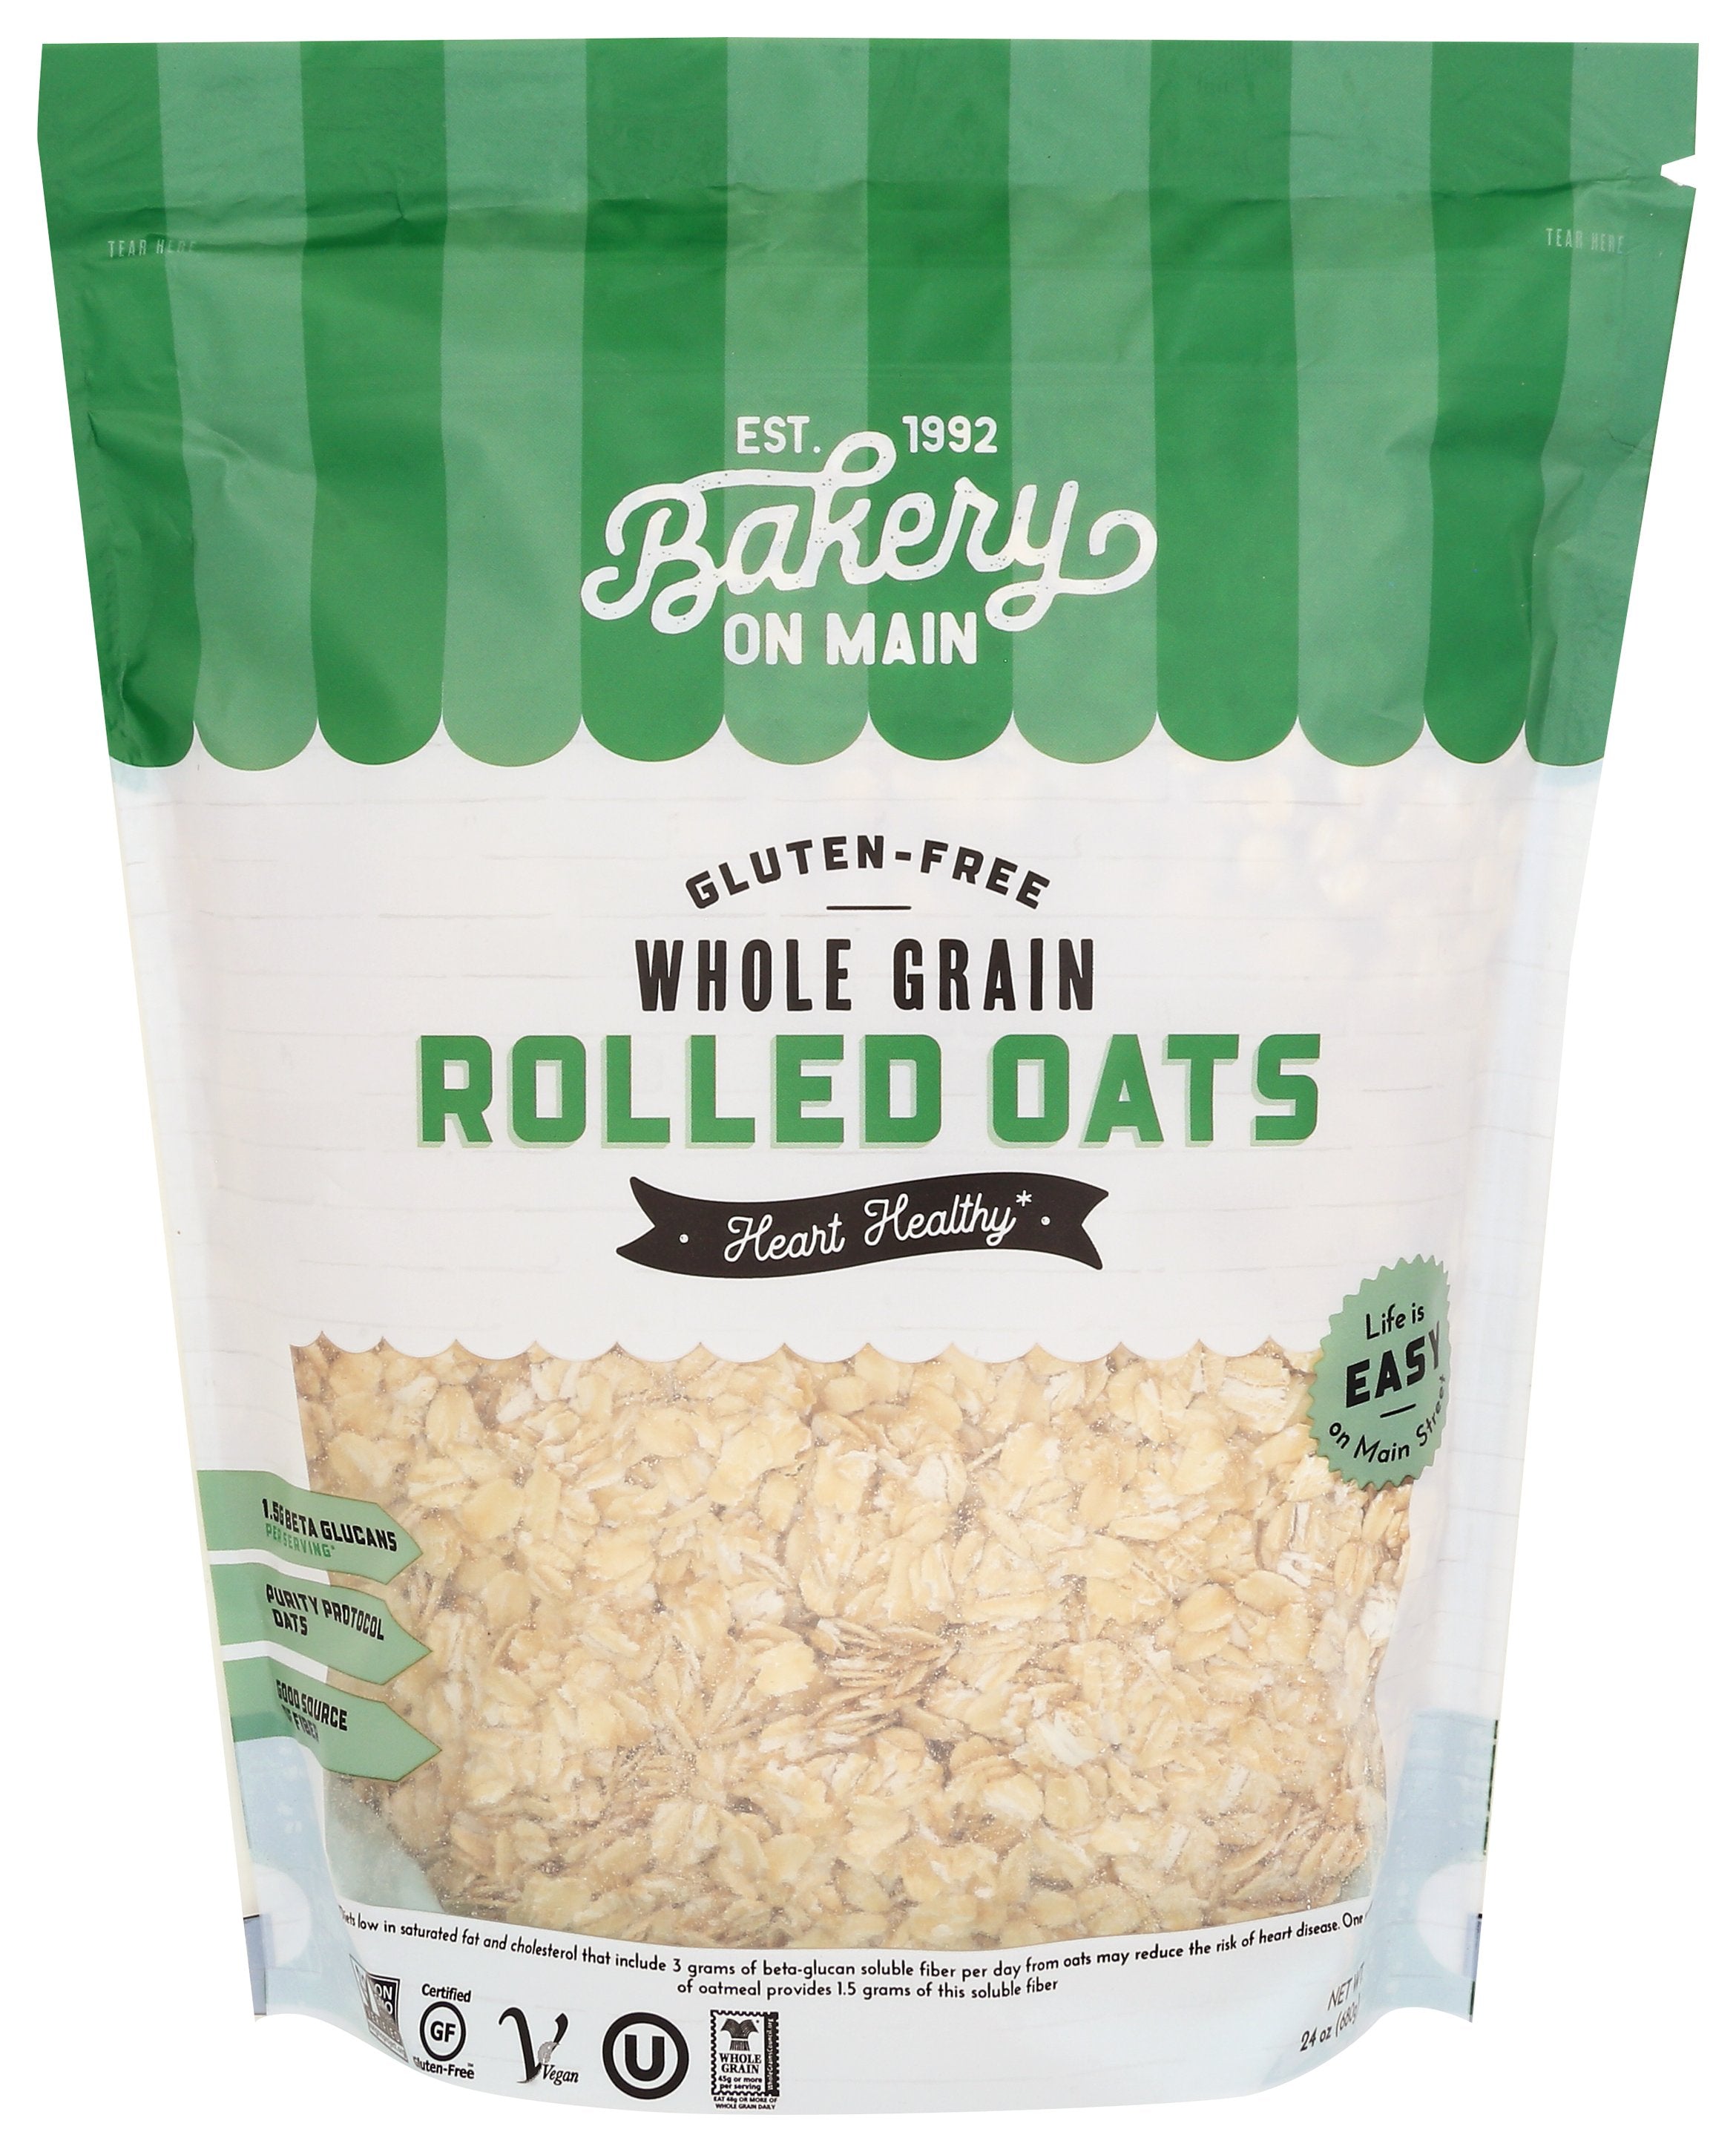 BAKERY ON MAIN CEREAL ROLLED OATS - Case of 4